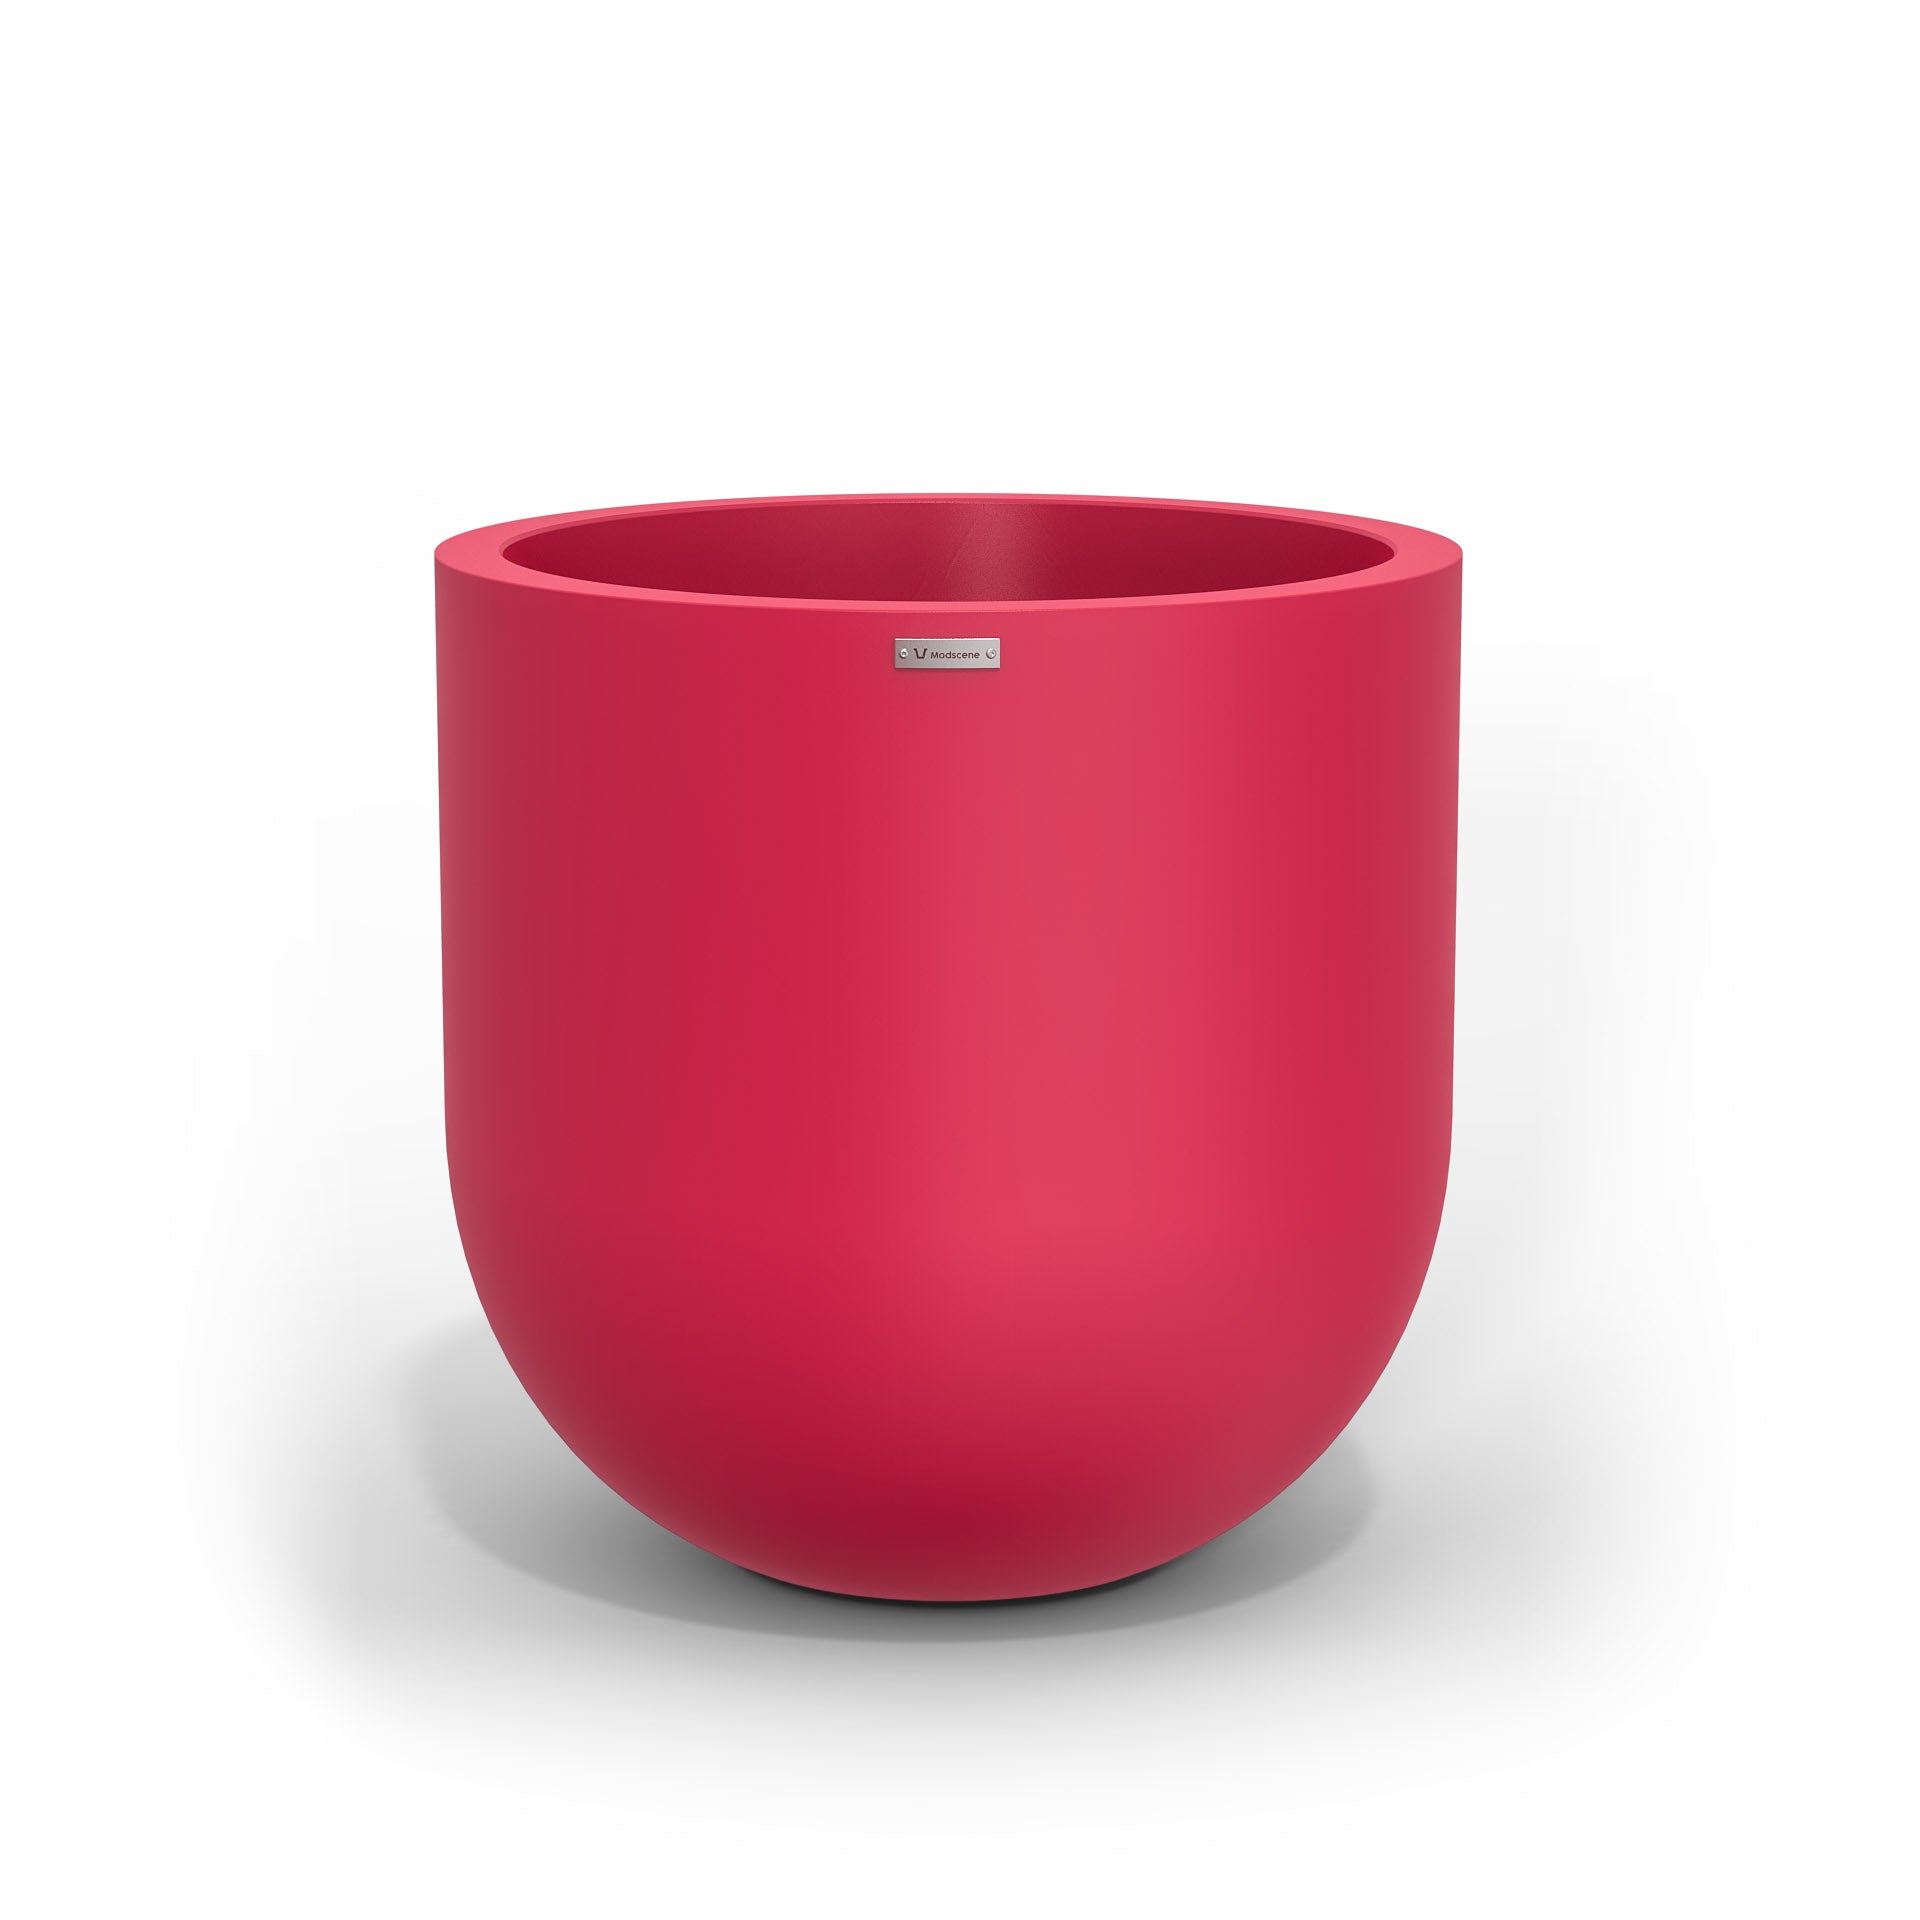 NZ made large Modscene planter pot in a pink colour